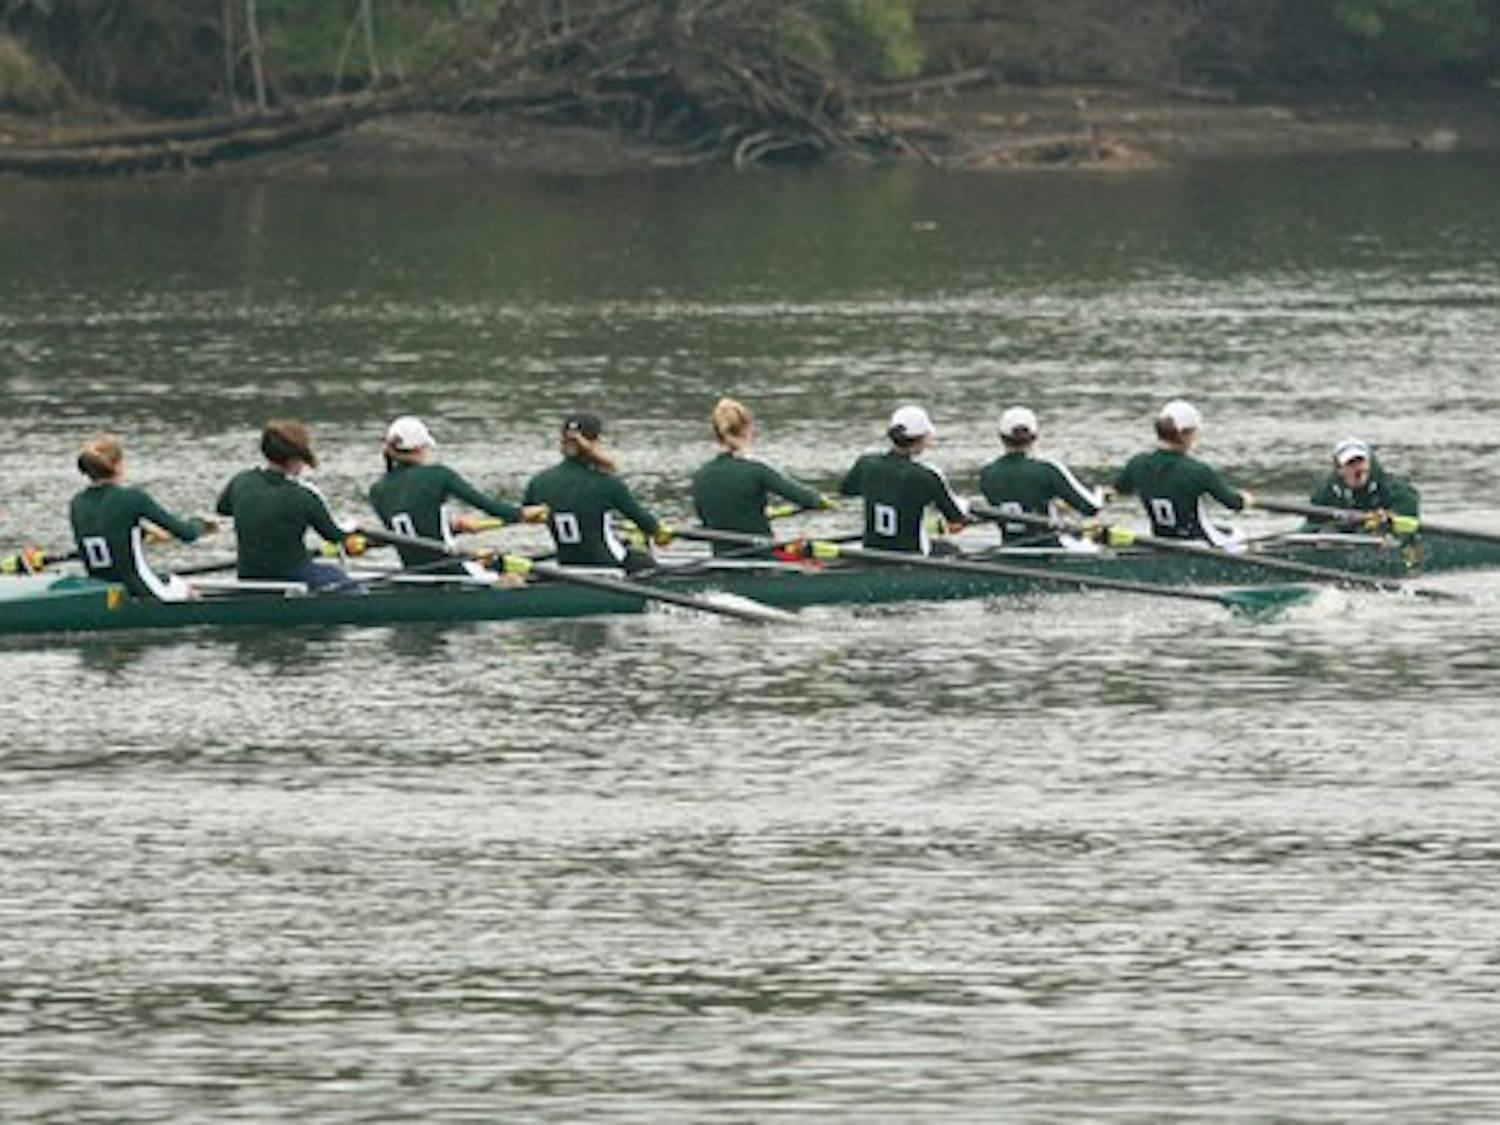 The women's crew team will travel to Villanova University on May 29 to compete in the NCAA Rowing Championships.